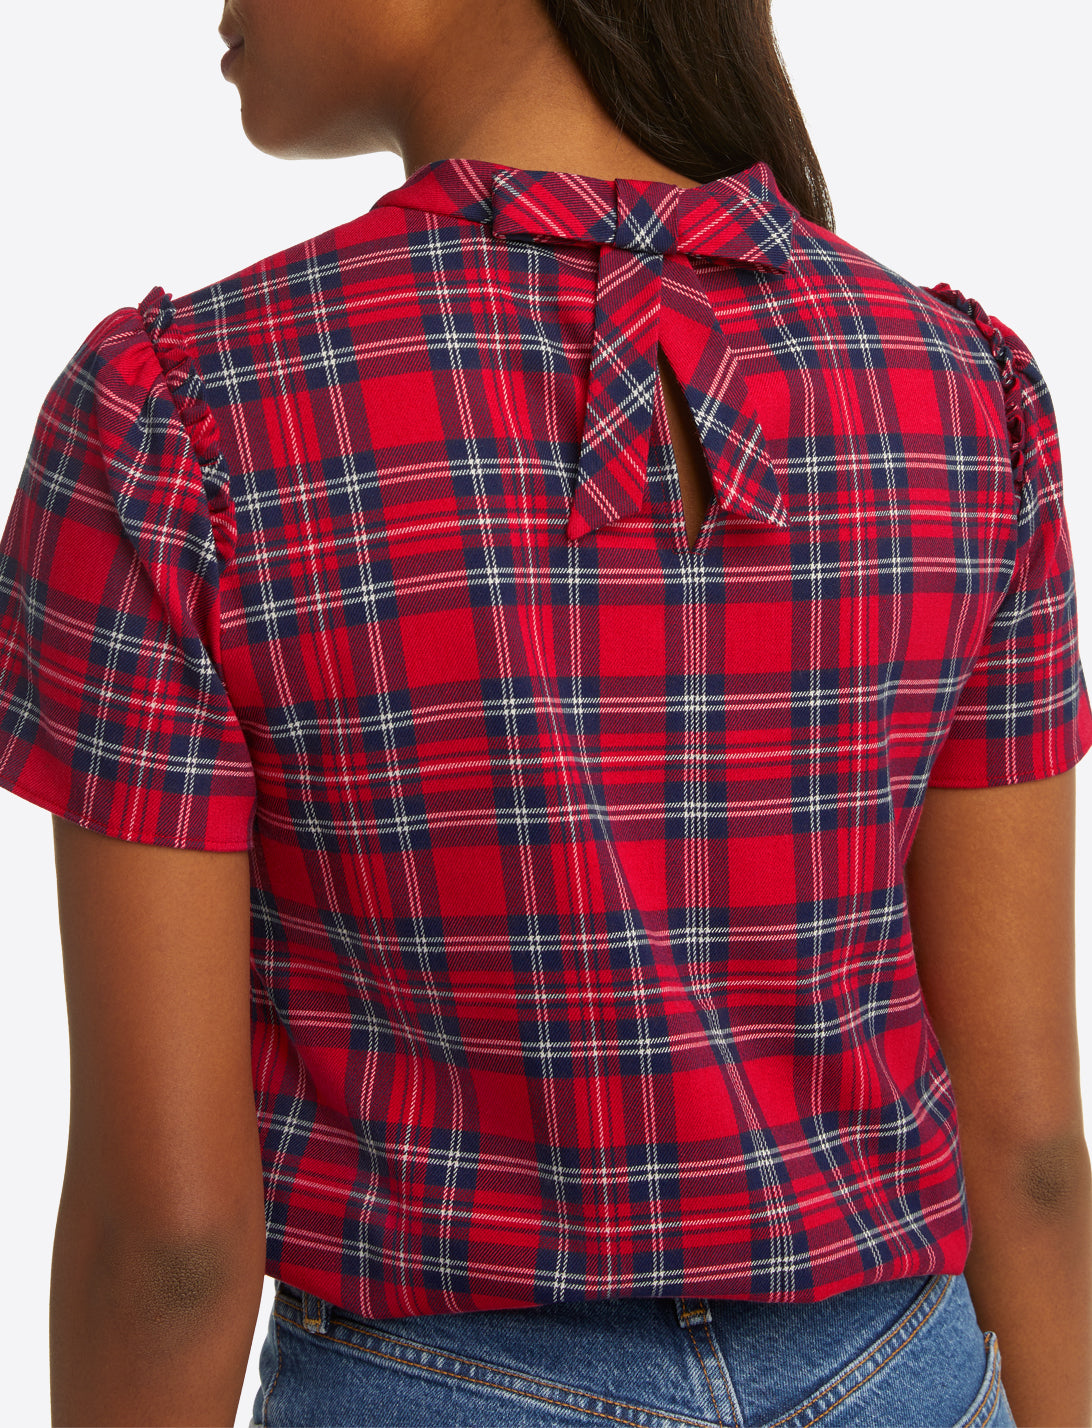 Bow Back Top in Angie Plaid